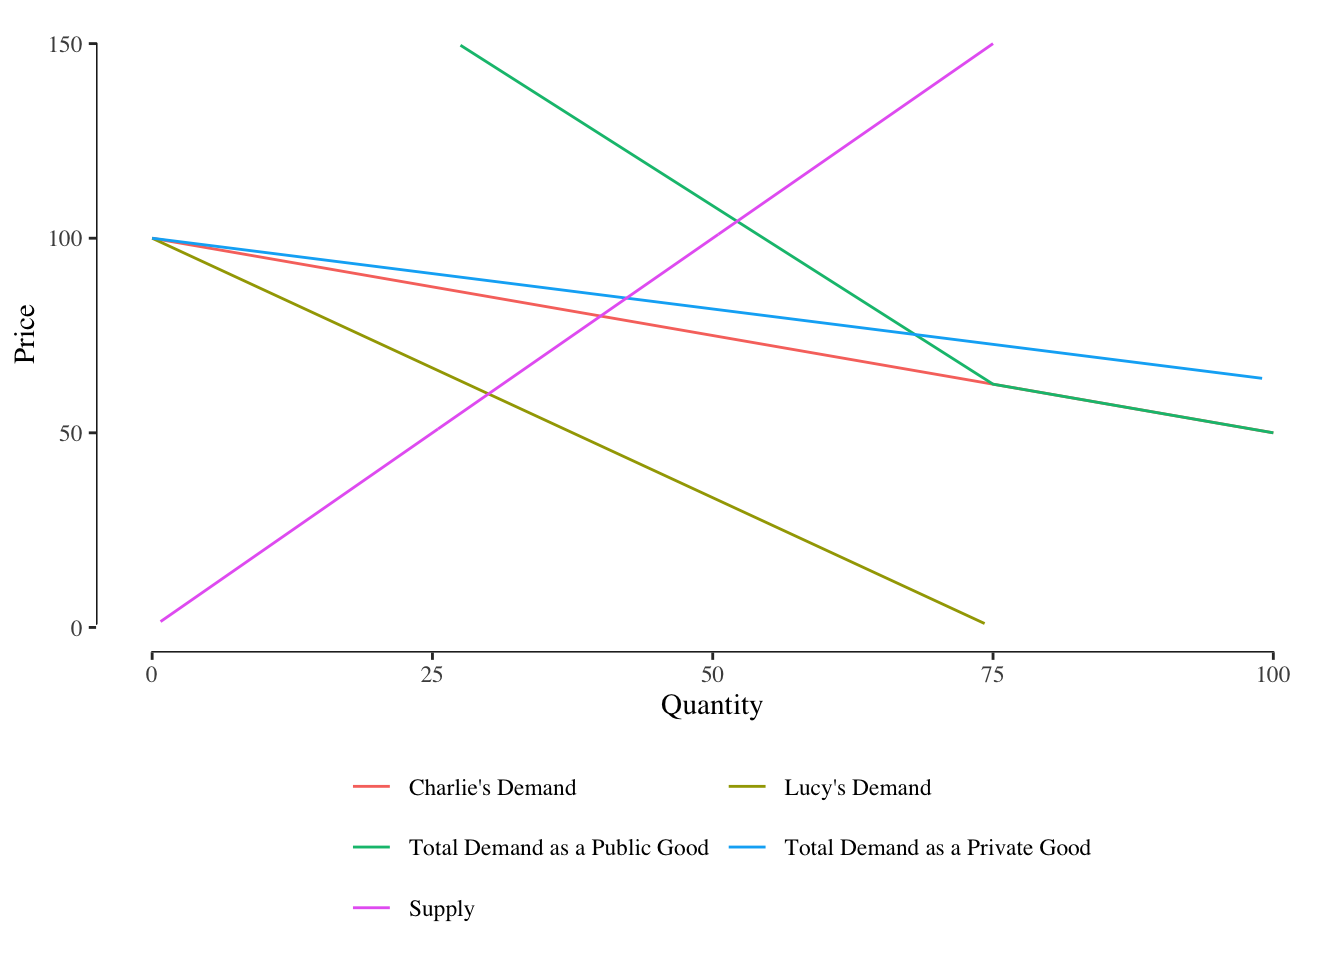 Consumer demand curves give us total demand. For private goods, we sum horiztonally (total $q$ for each $p$) while for public goods we sum vertically (total $p$ for each $q$).